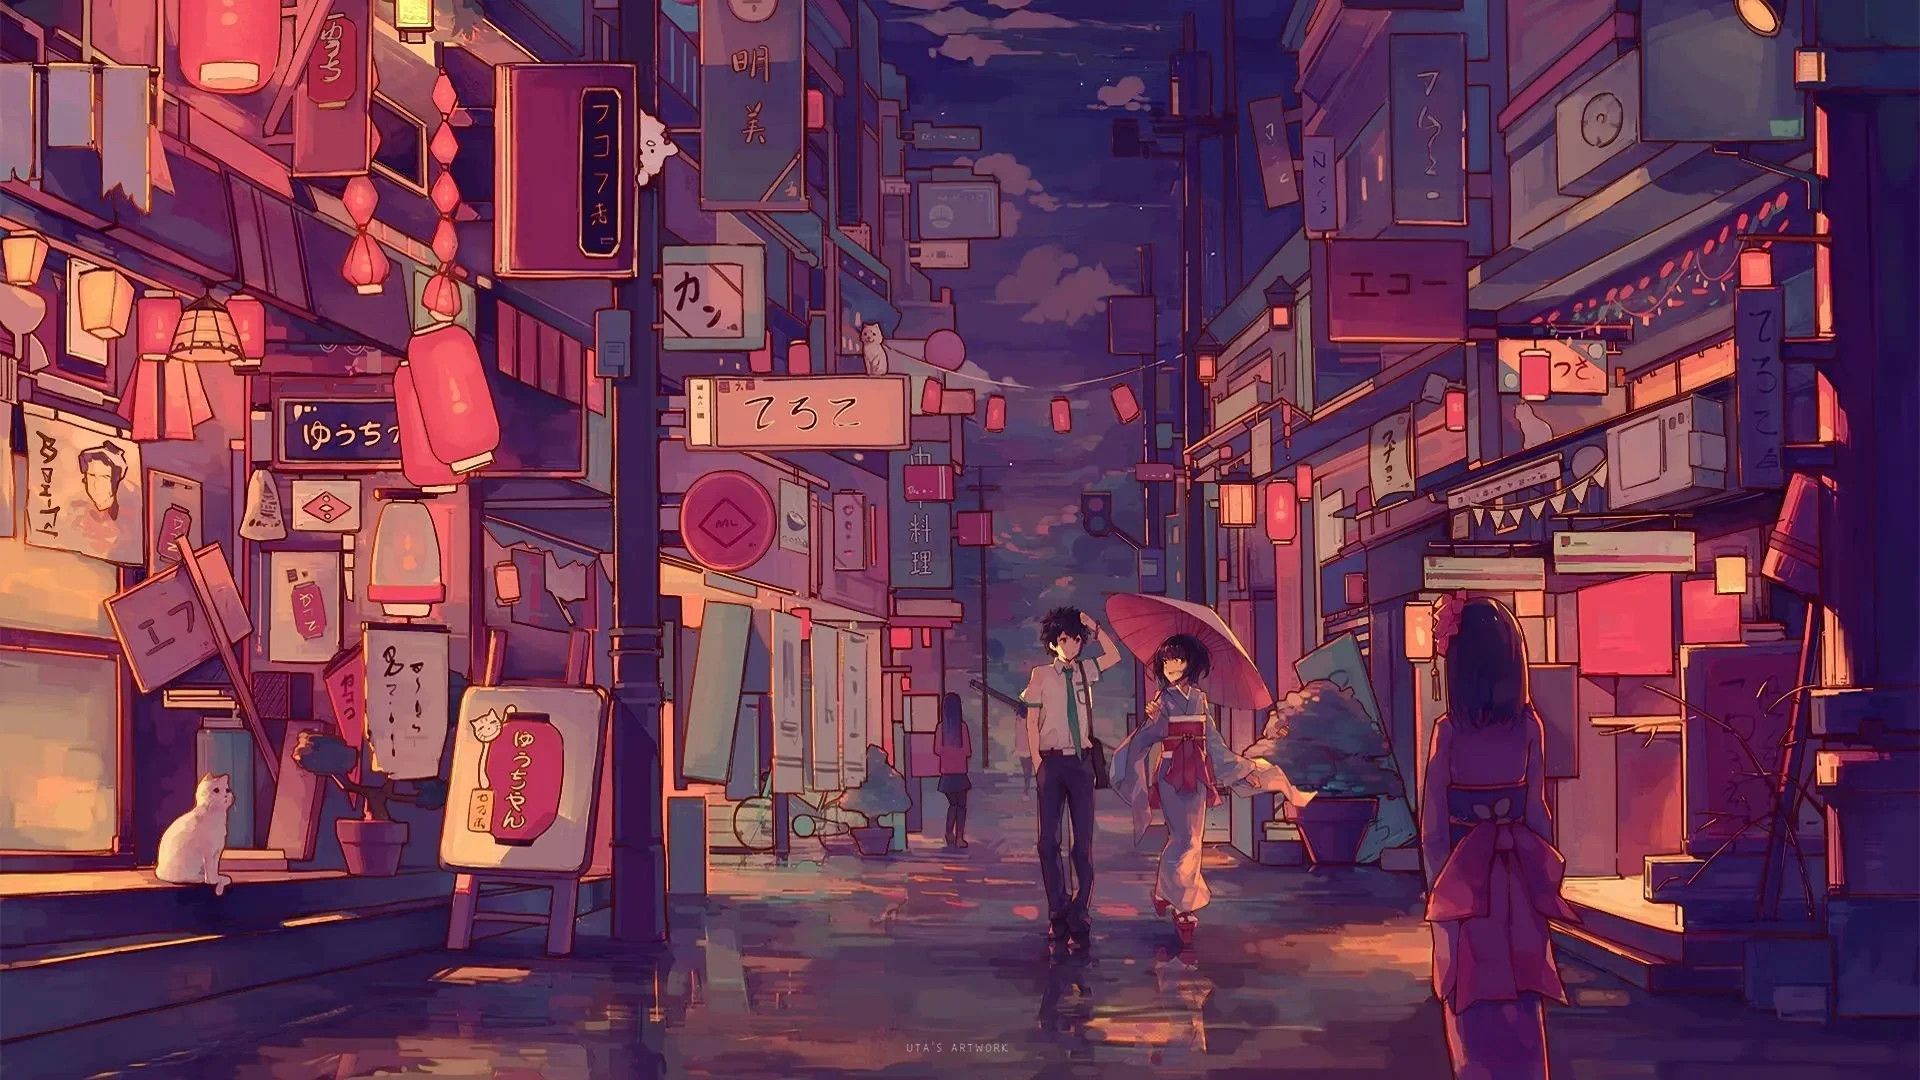 1920x1080 anime city wallpaper for your phone - Japan, anime city, Japanese